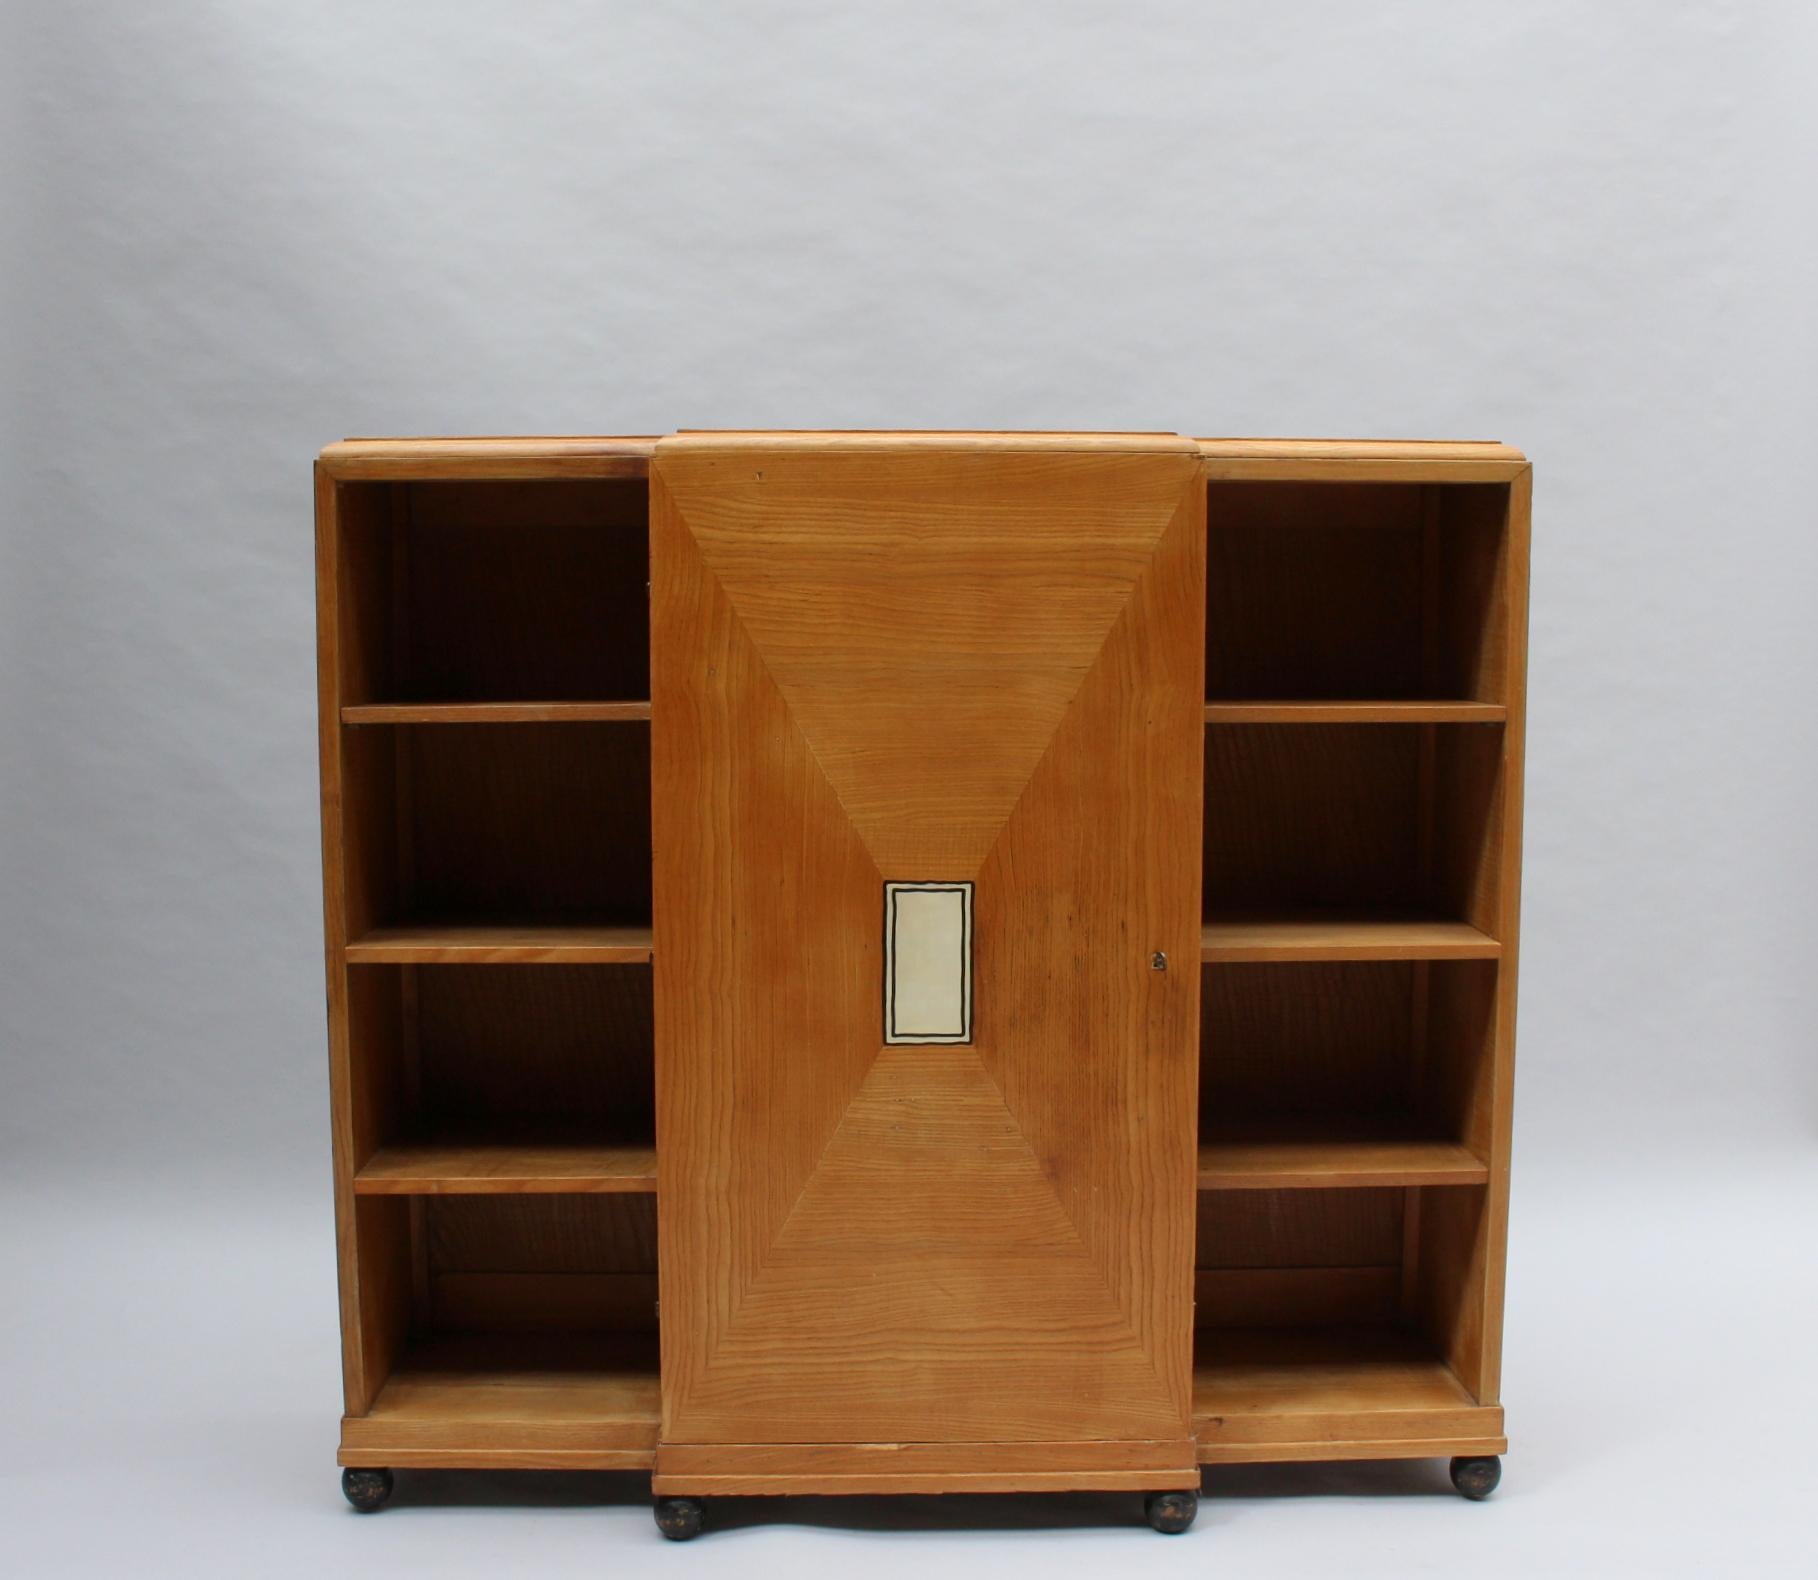 With a central wood and bone marquetry door, two inside drawers and brass hardware.